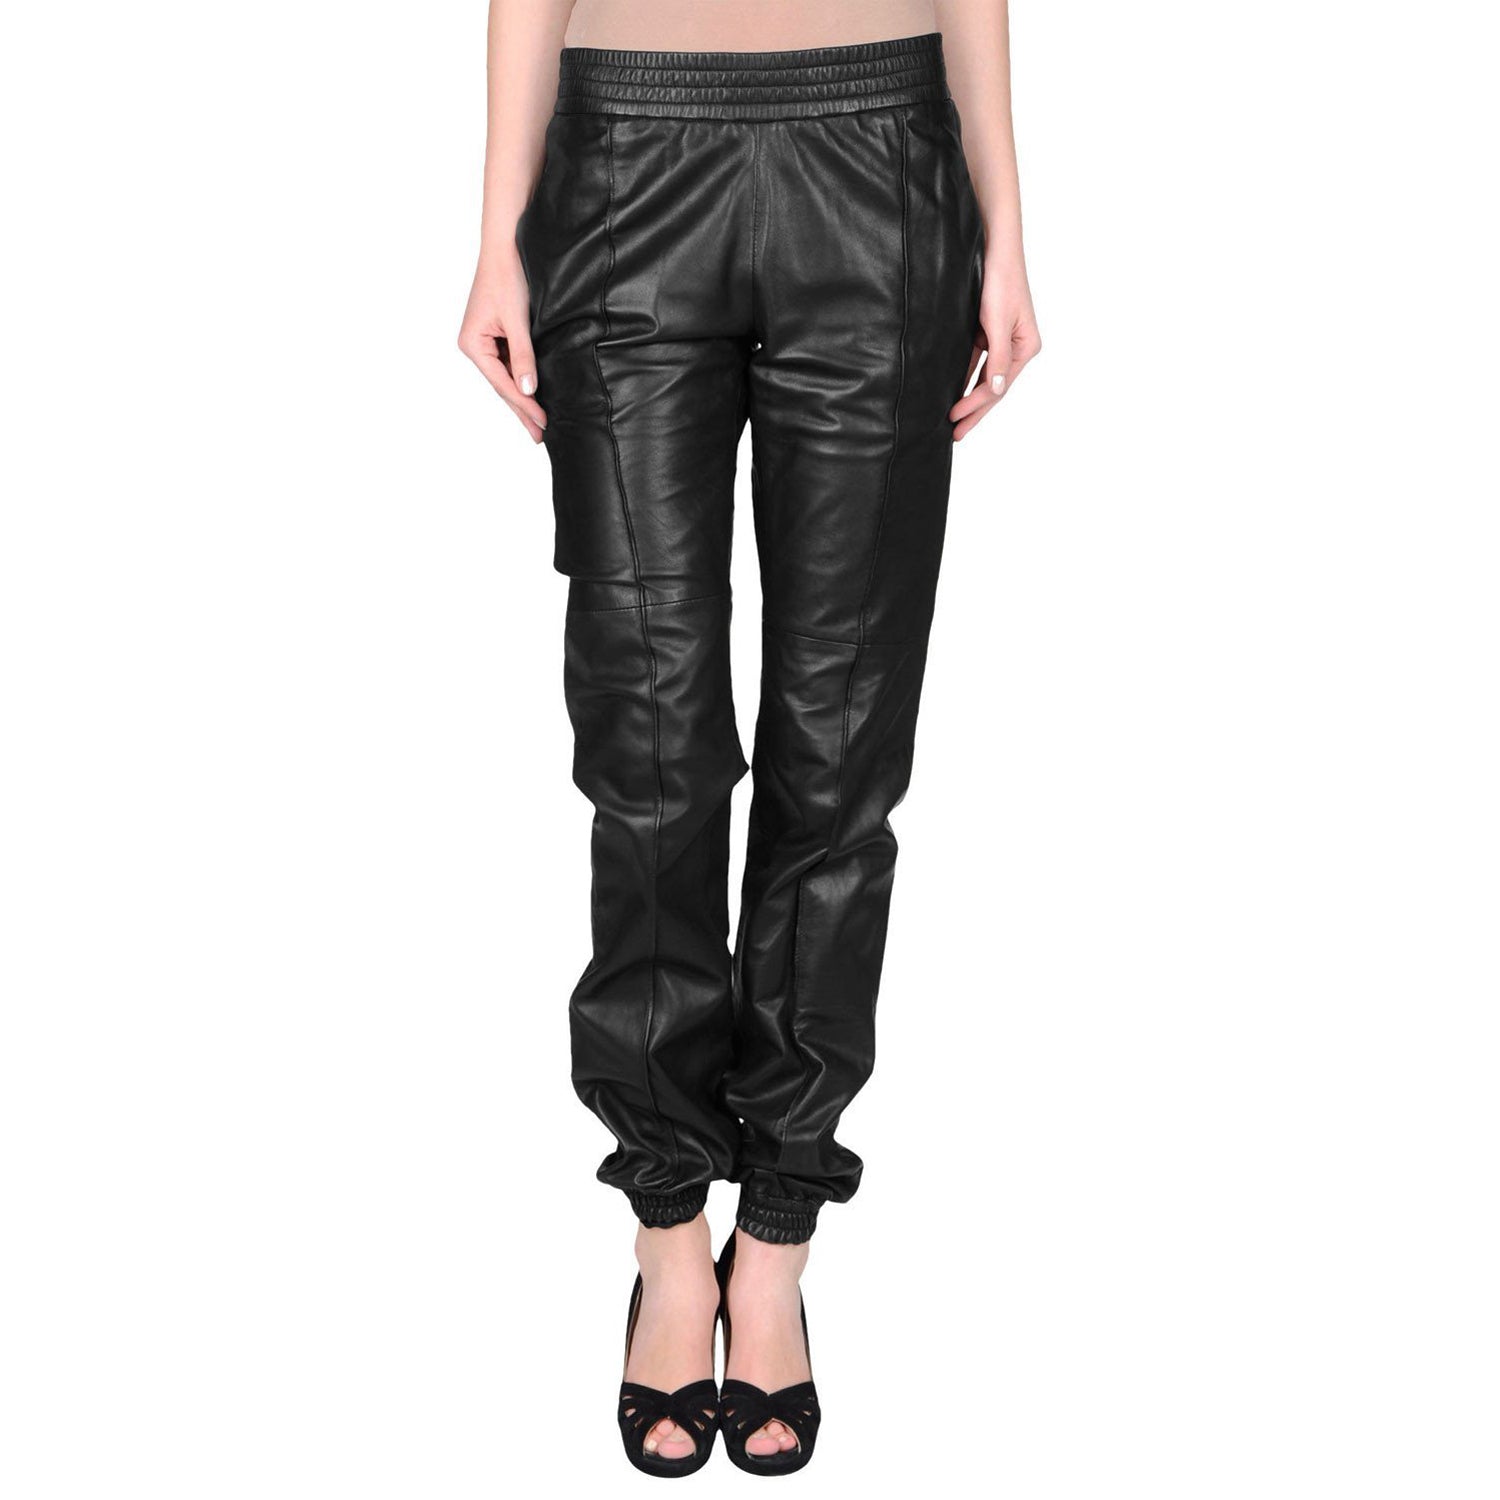 Black Leather pants with elastic waist (style #4) – Lusso Leather